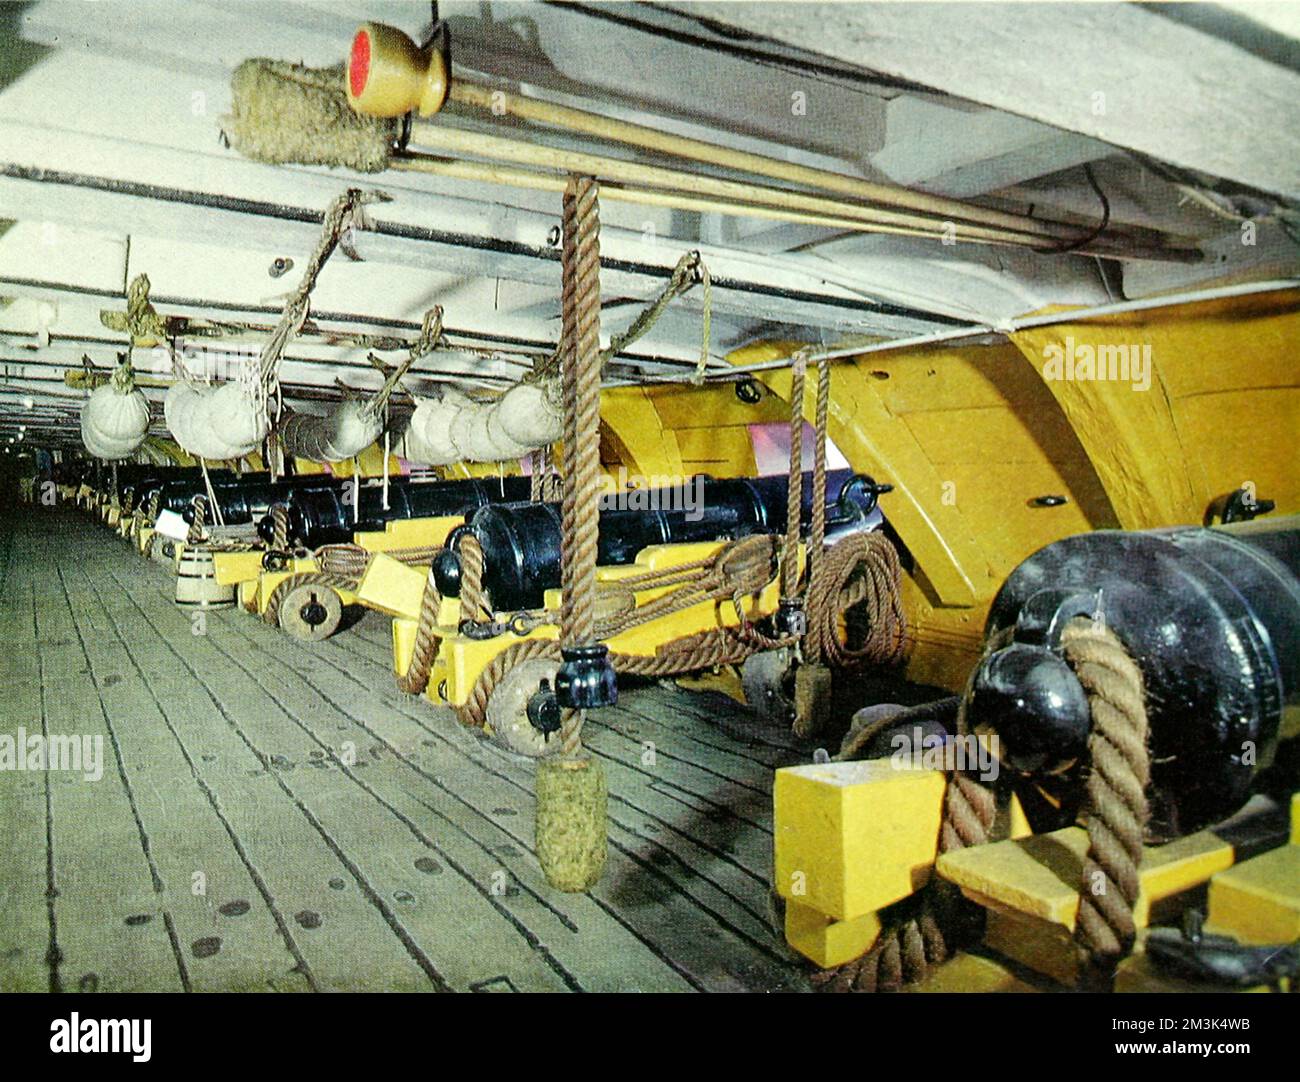 The interior of the famous H.M.S. Victory after extensive redecoration and restoration shown for the first time in colour.  This is the lower deck with canons called thirty-two pounders.  The rammers and sponges are above the guns and the crew's hammocks are slung and folded beside the battle stations.     Date: 19/10/1963 Stock Photo